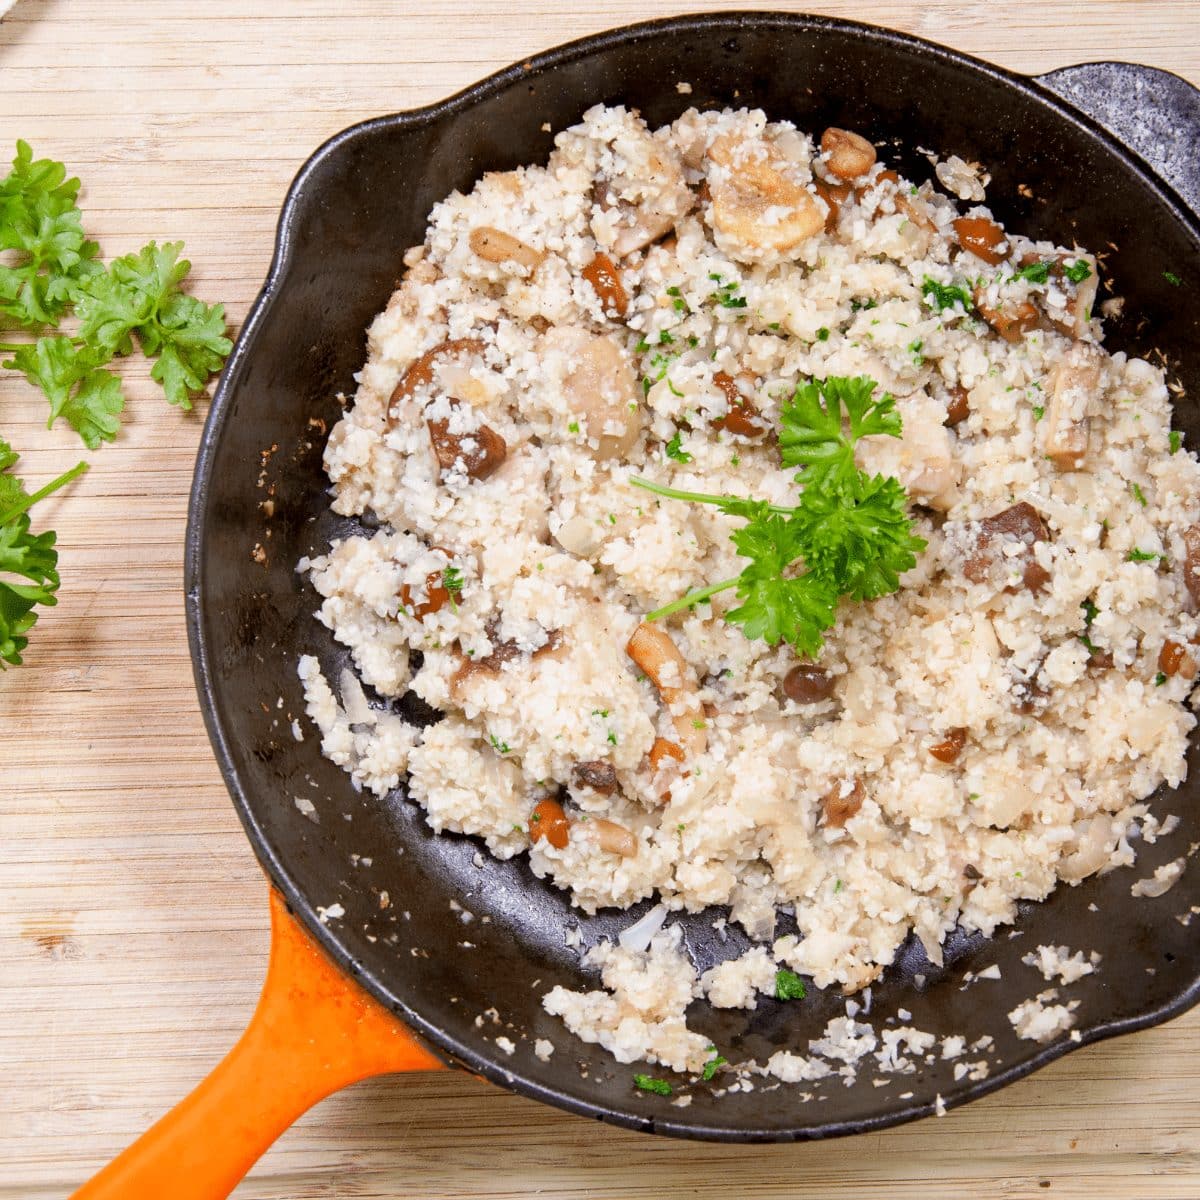 This wild mushroom & garlic cauliflower rice recipe is a revelation. Not only low in fat and carbs, but it's very easy to make and so delicious to taste. Yum! | theyumyumclub.com